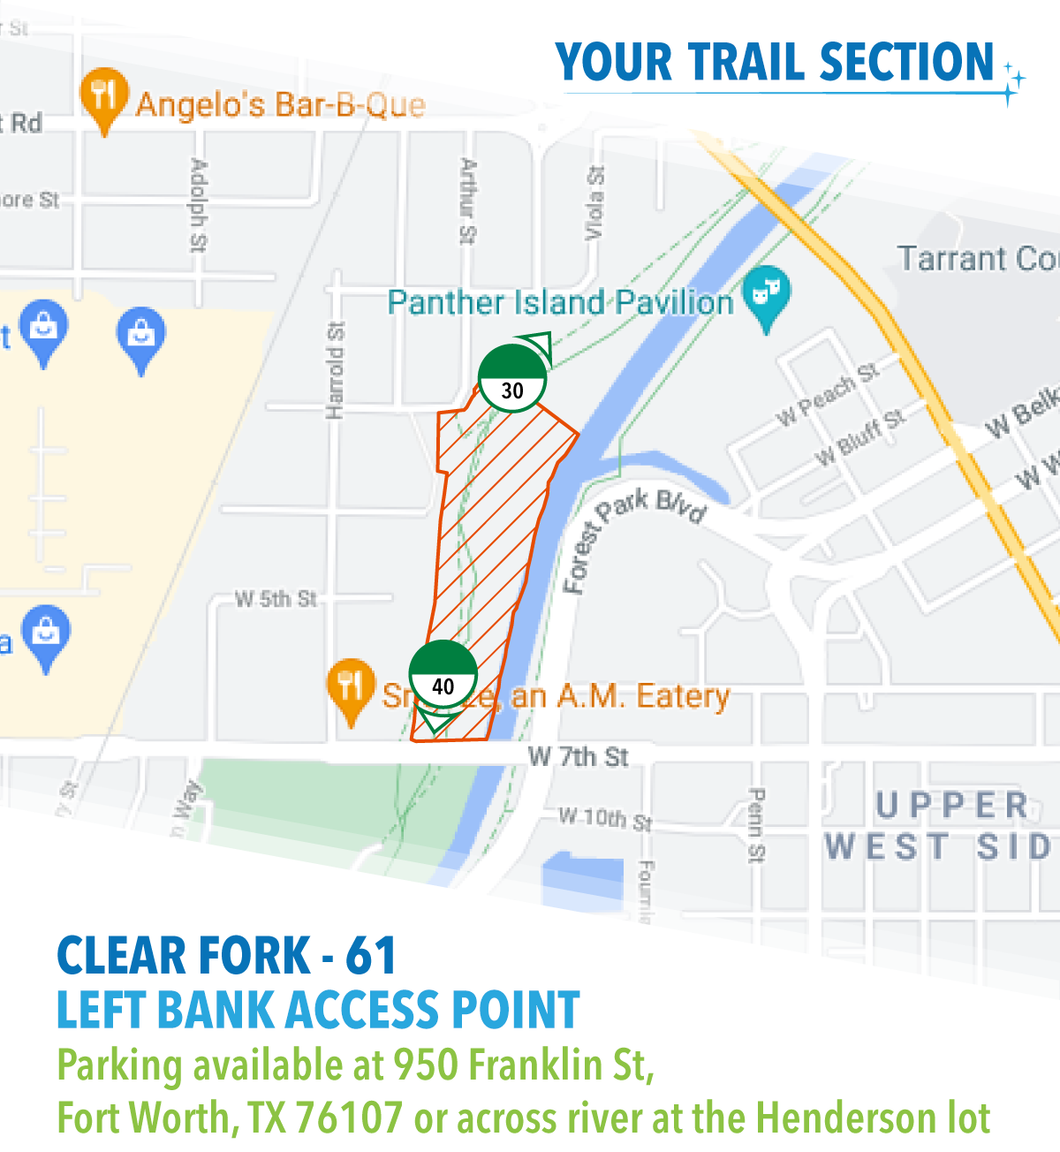 Section 61 – Left Bank Access Point